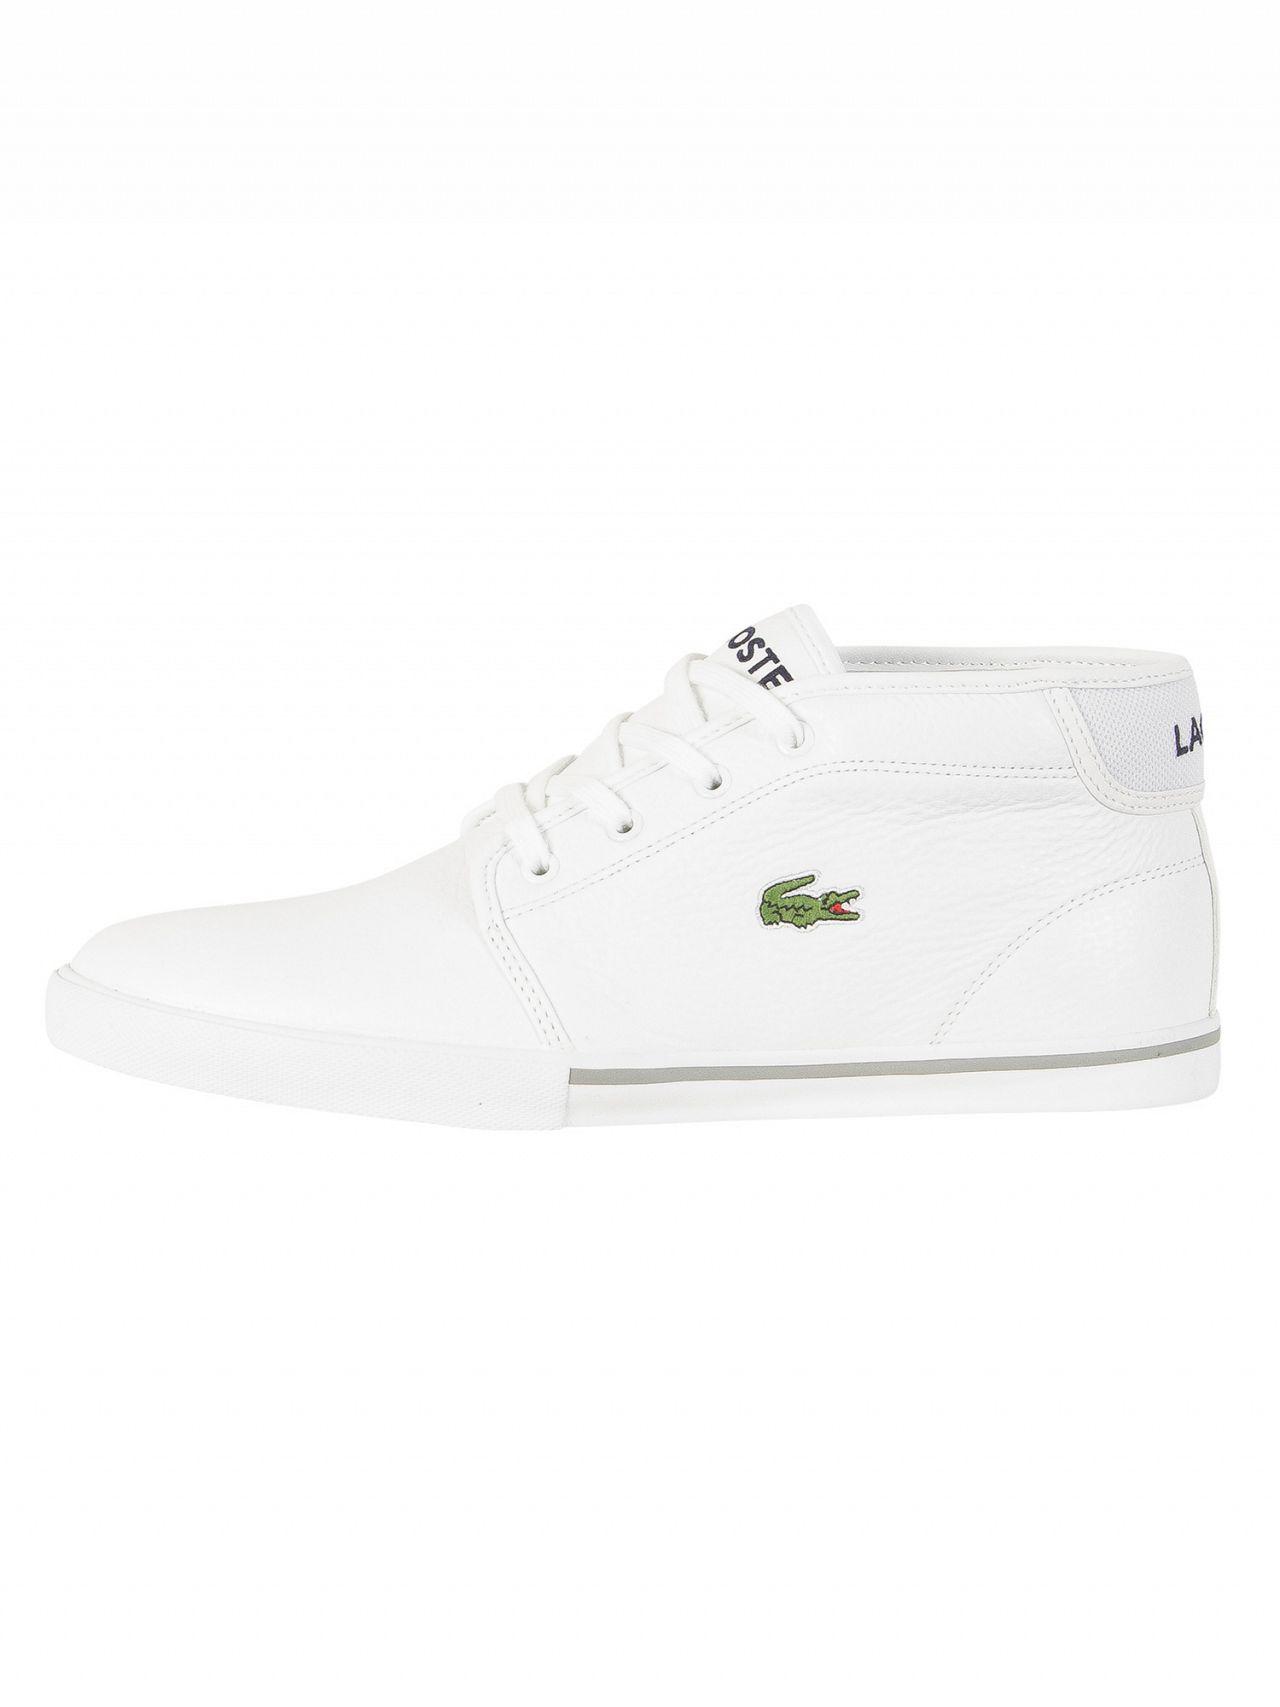 mens lacoste ampthill trainers